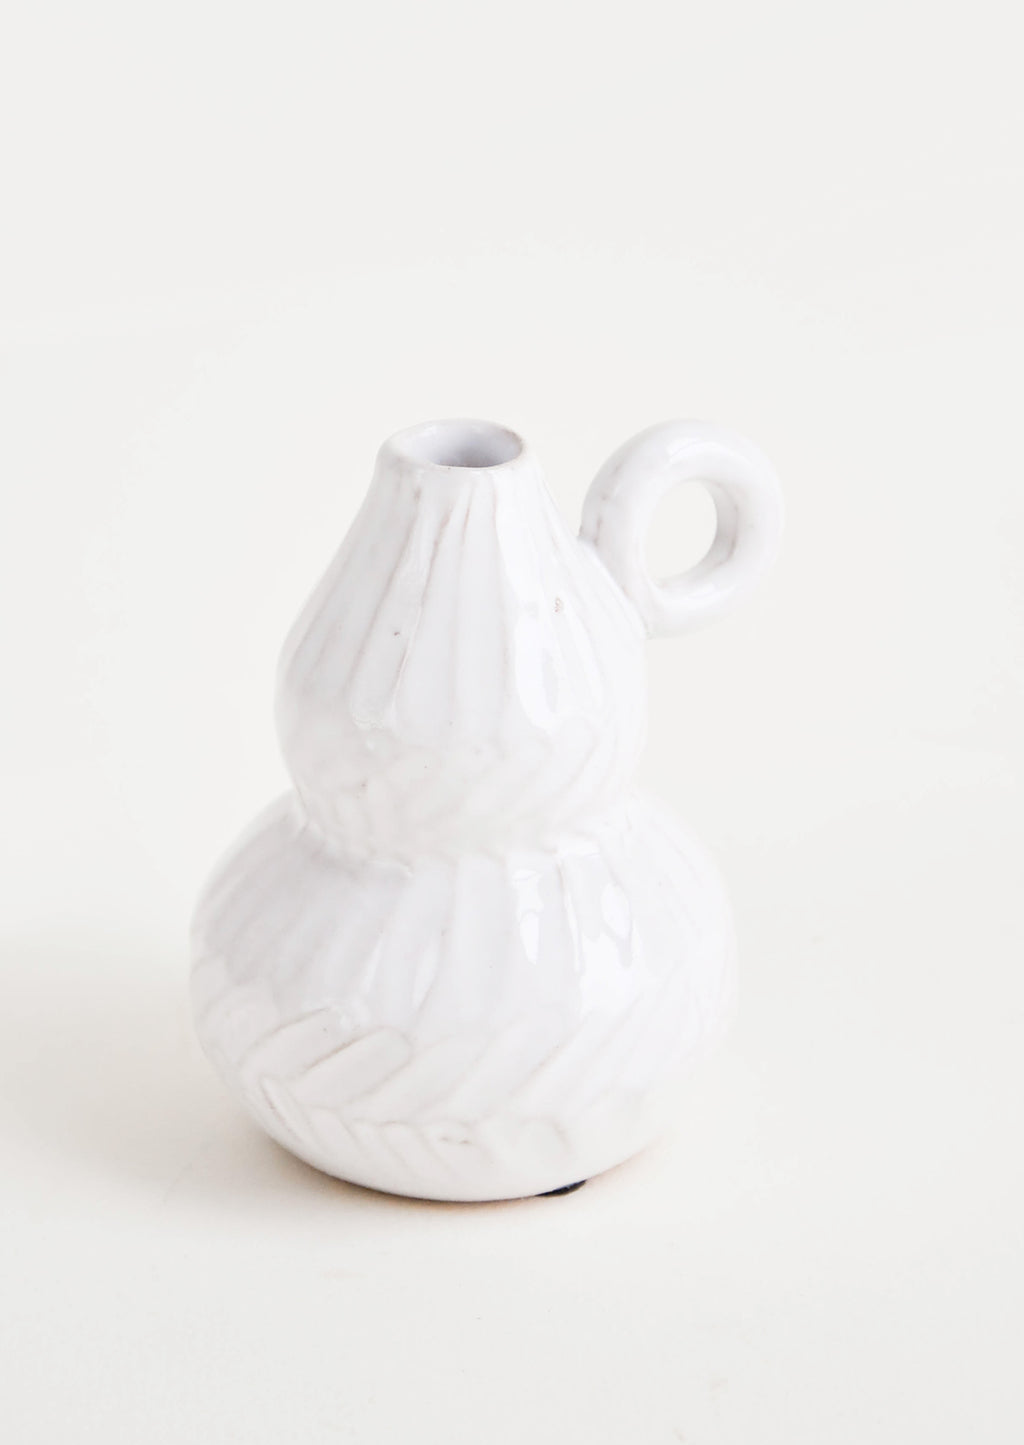 1: White ceramic bud vase with pinched center and tapered top. Small, round handle at side. Allover etched texture.